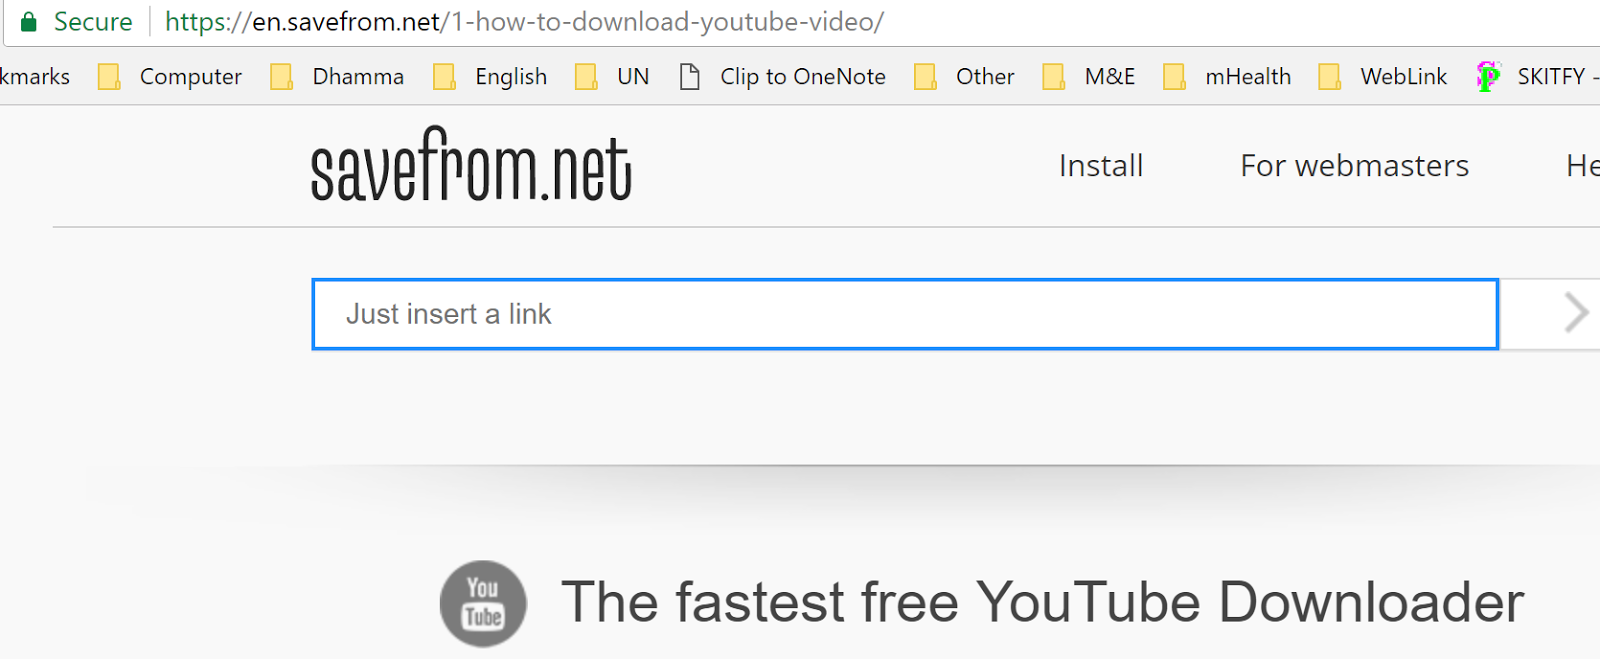 Save from youtube mp3. Save net.